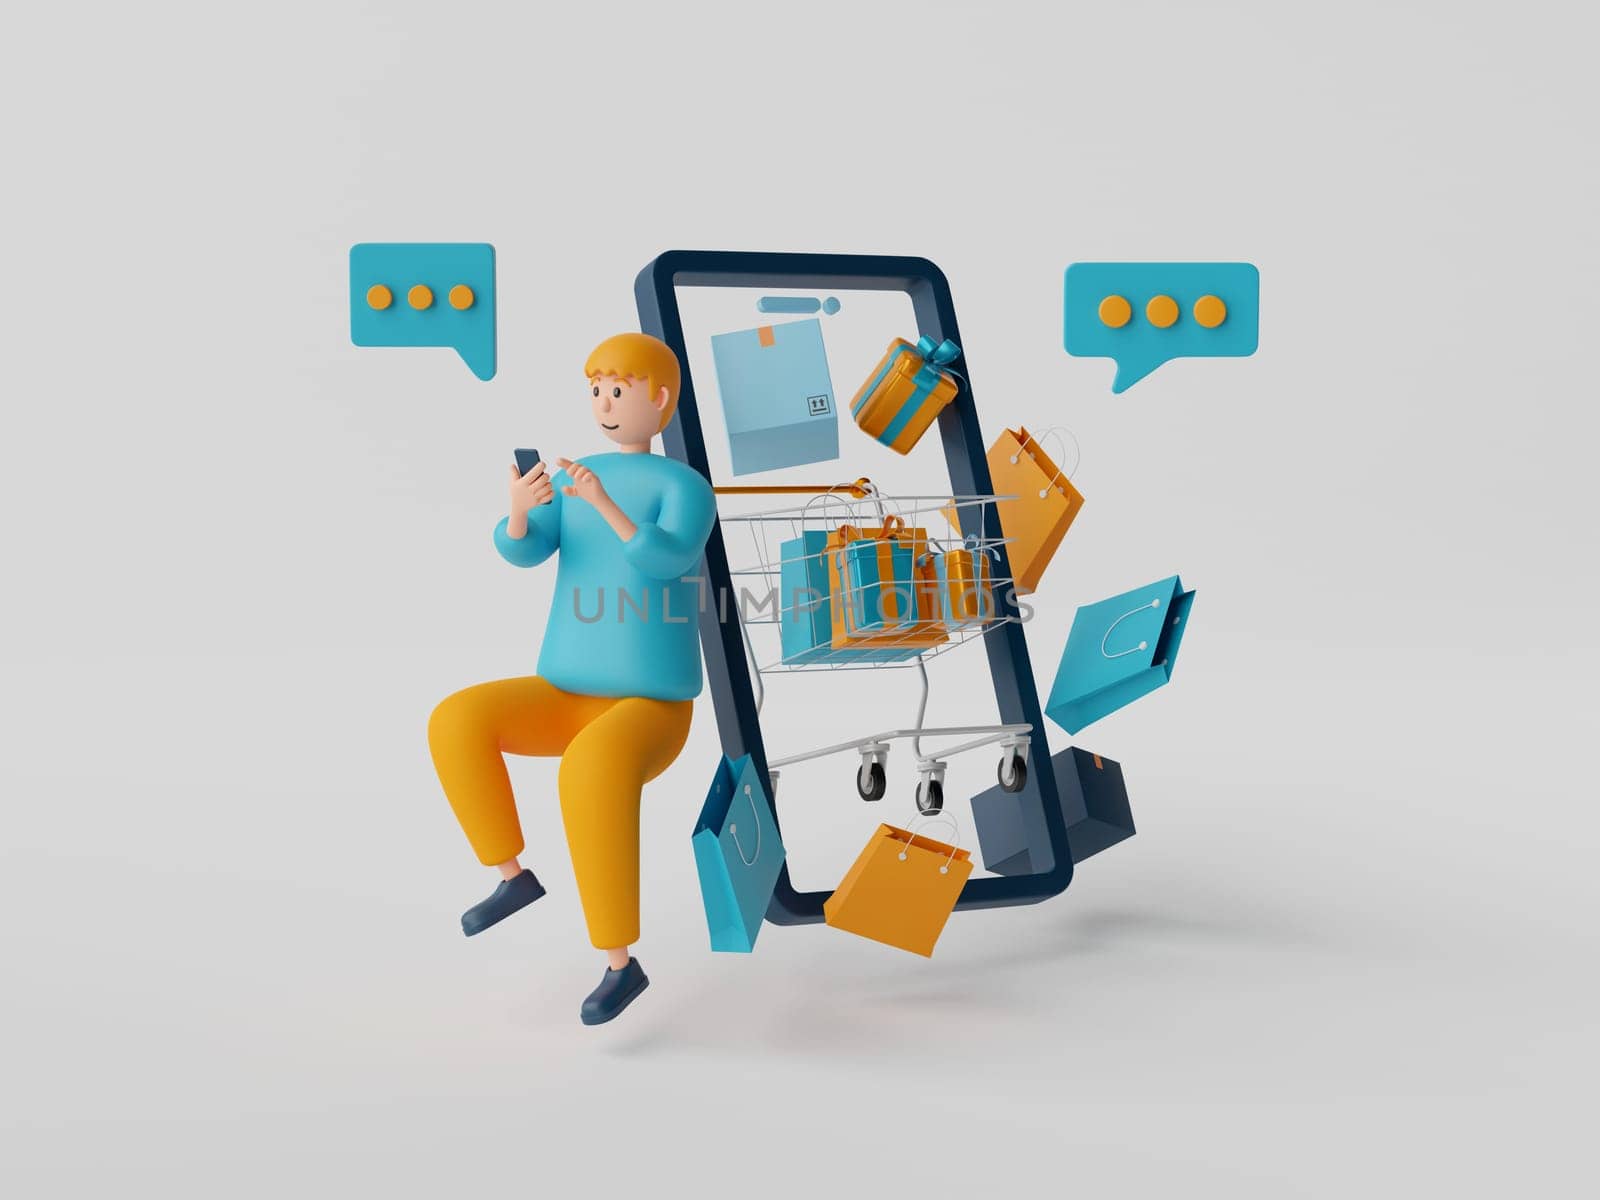 3d illustration of a man shopping online via application on smartphone with shopping item.